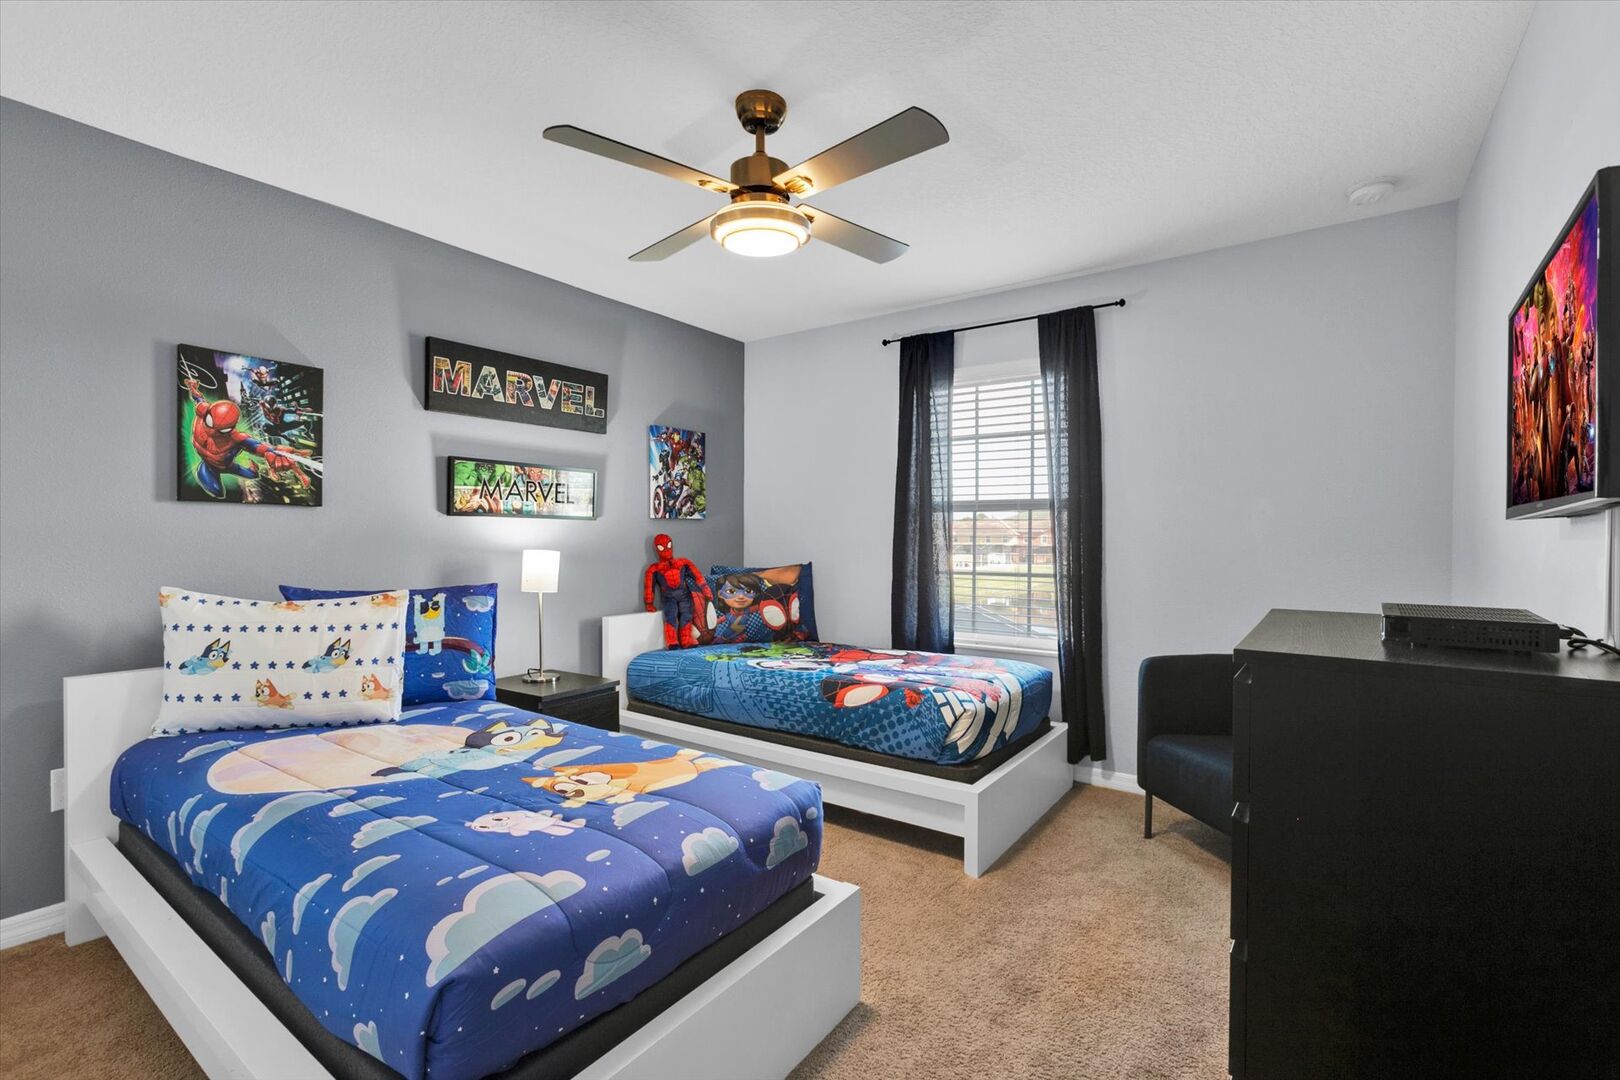 Two Twins Bedroom 3 Upstairs
Marvel Theme